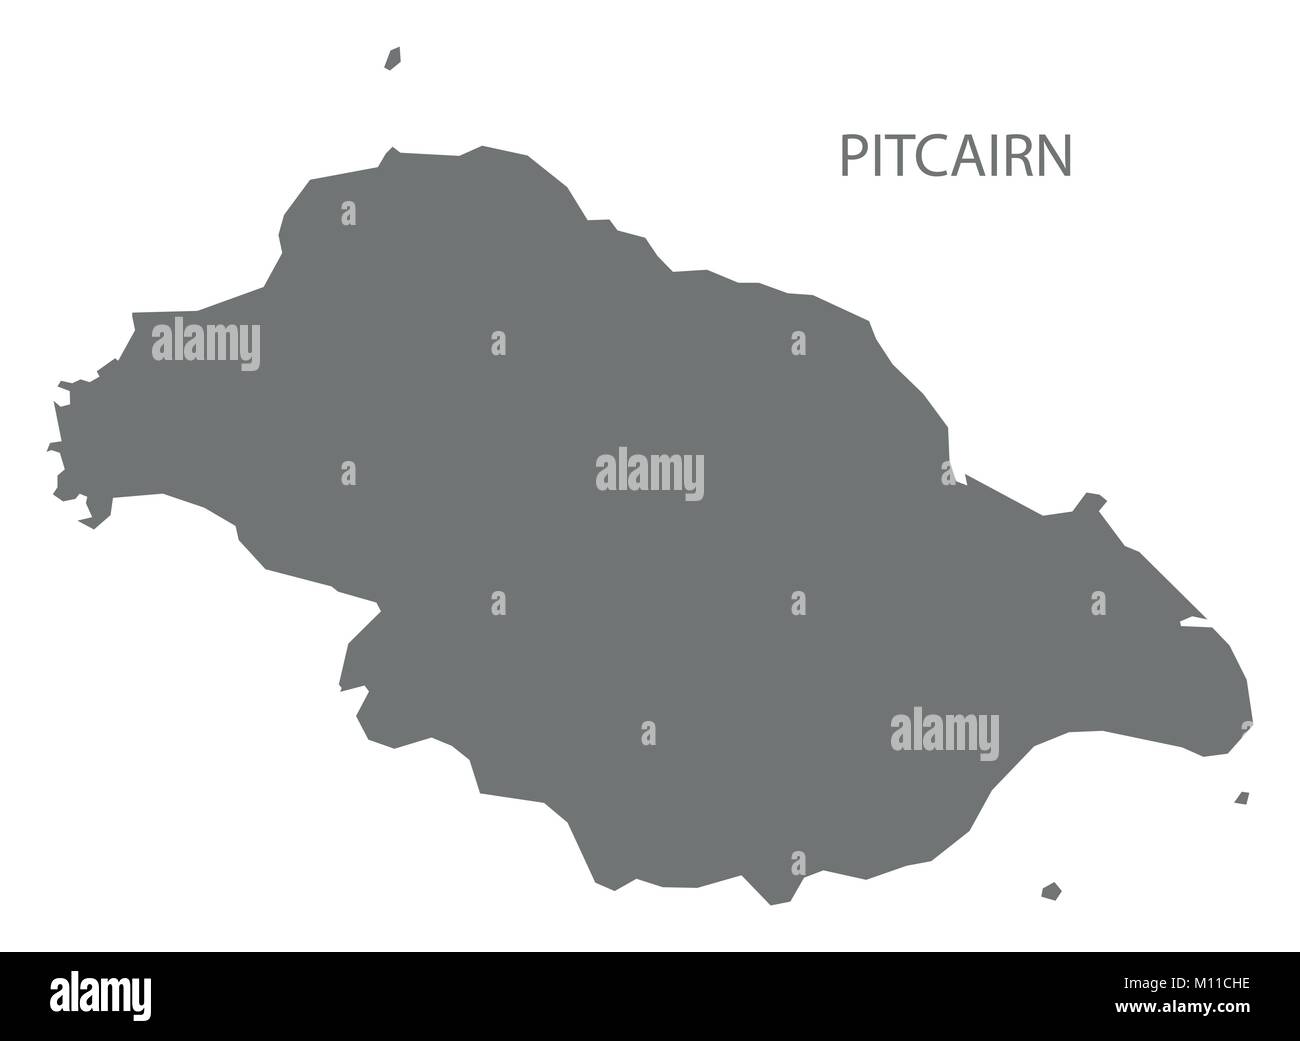 Pitcairn map of Pitcairn Islands grey illustration silhouette shape Stock Vector